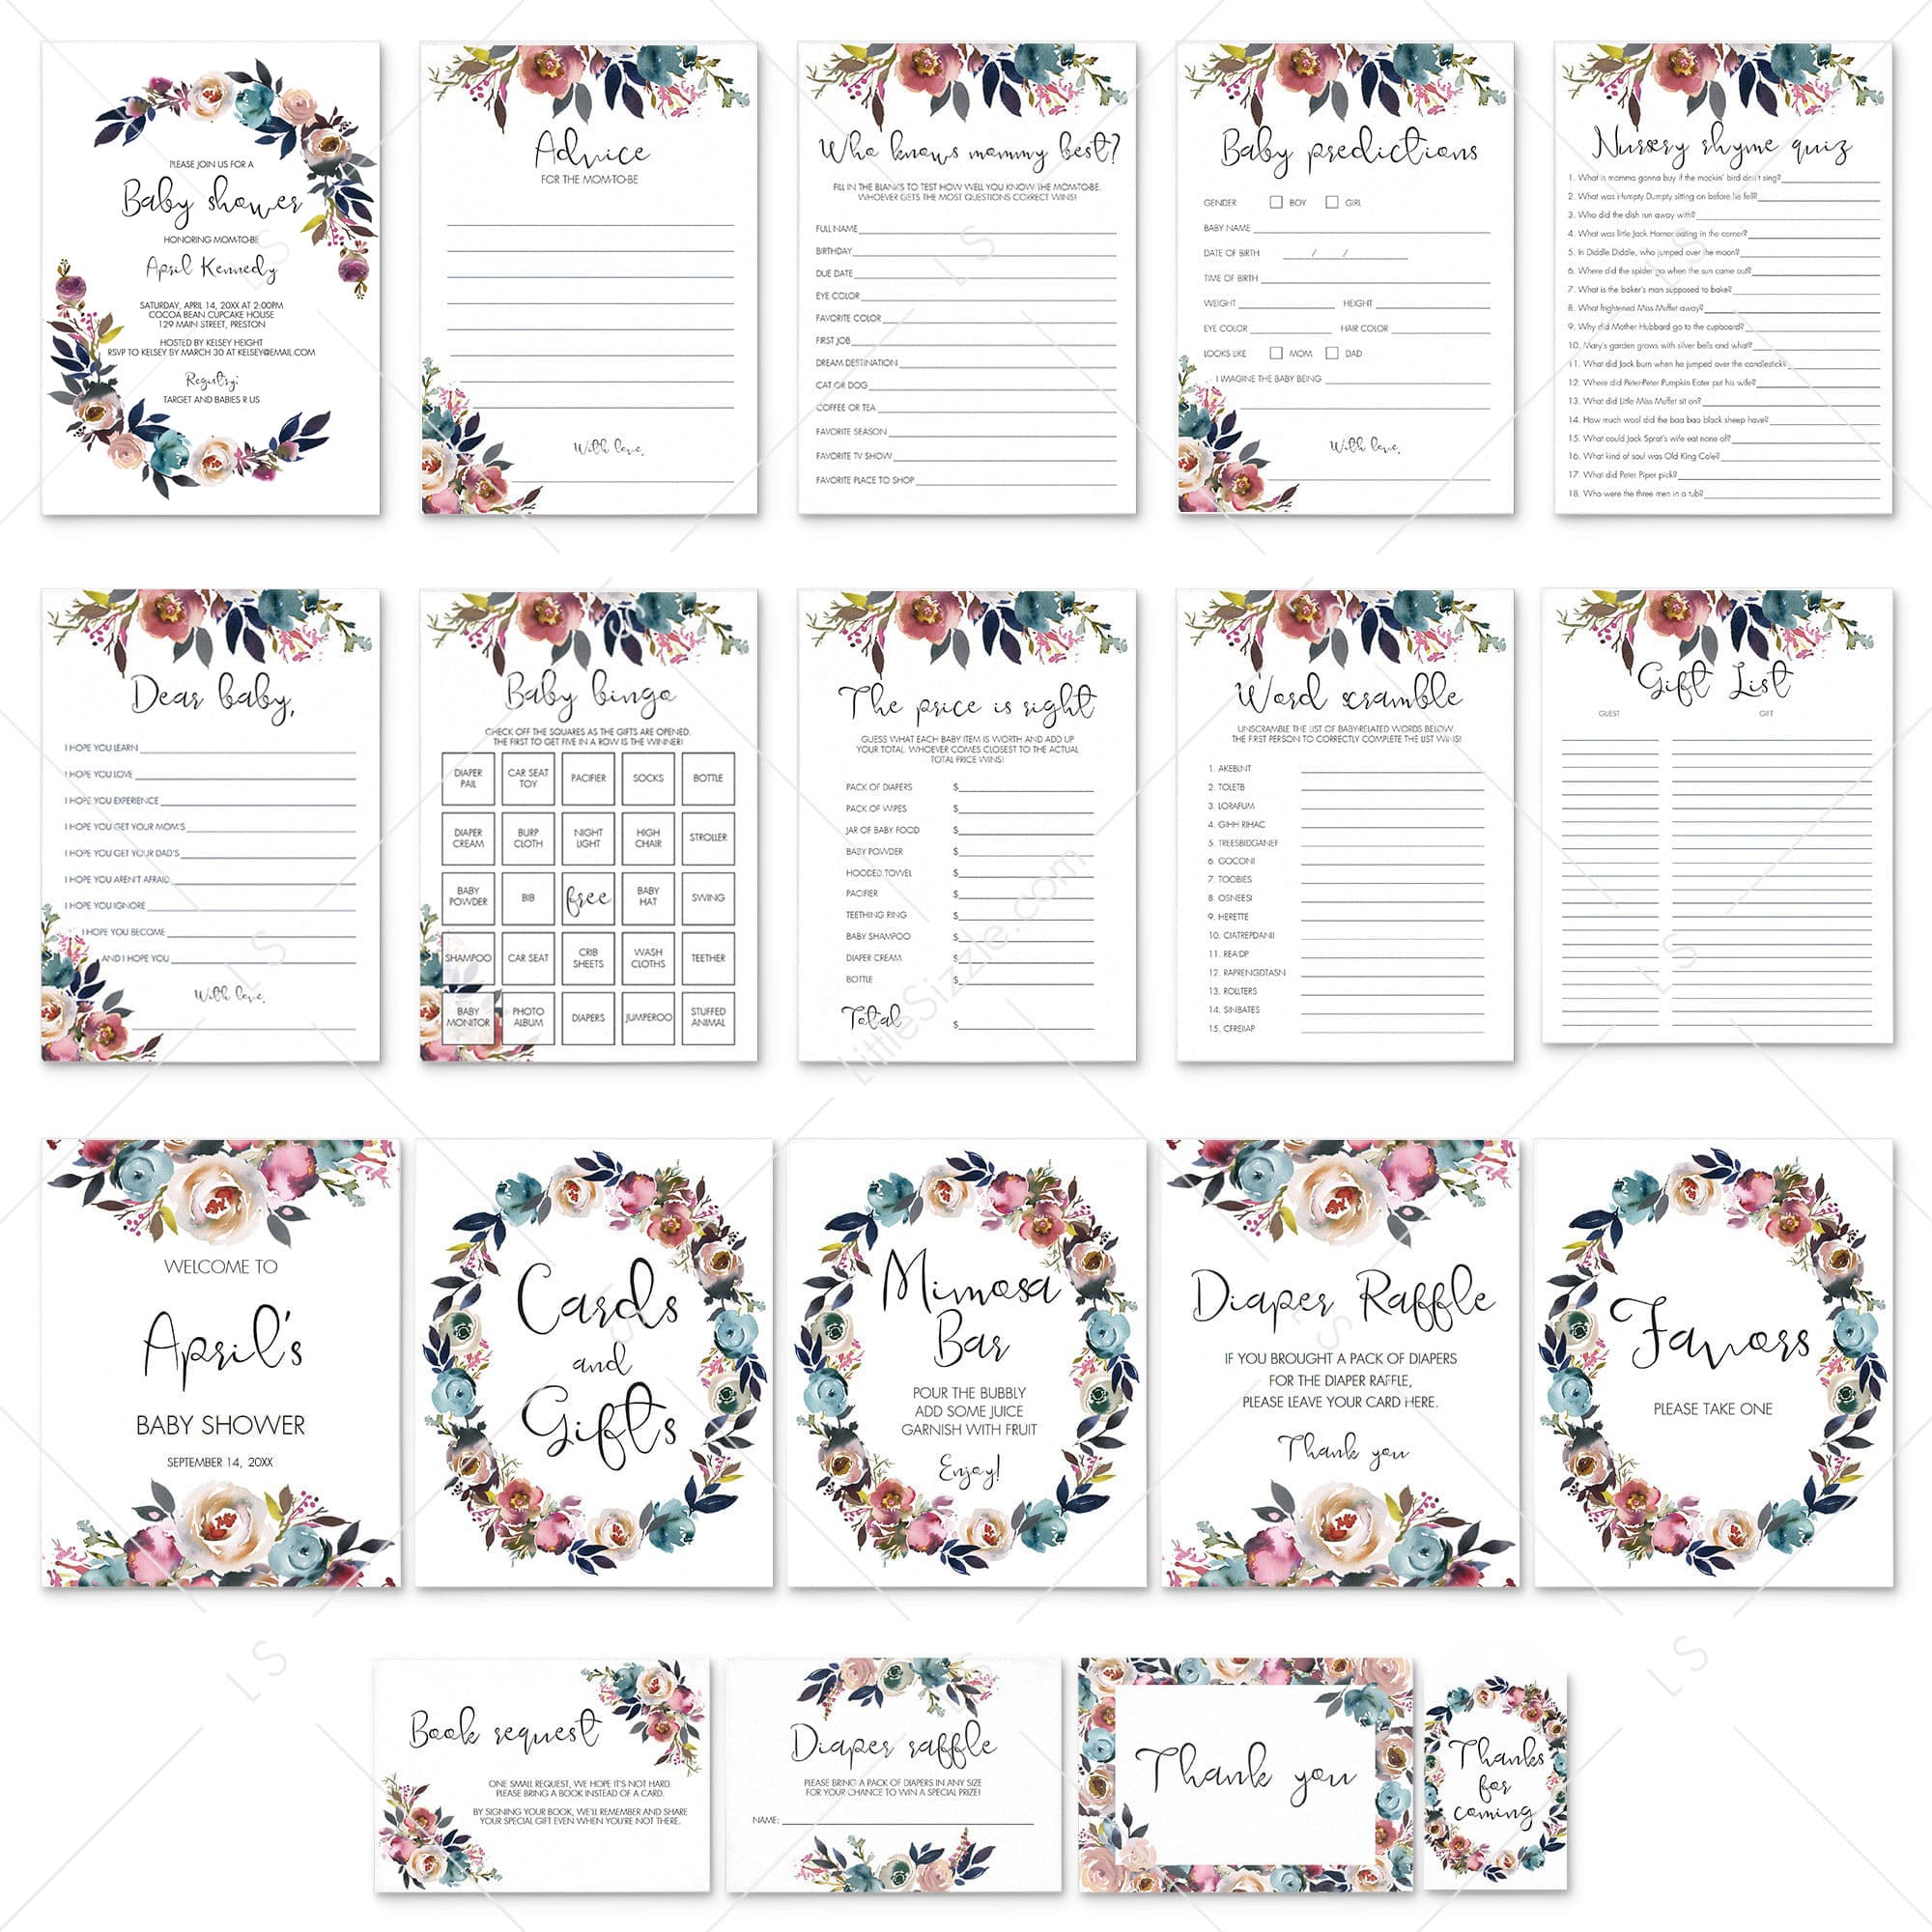 Bohemian Baby Shower Party Bundle Instant Download by LittleSizzle